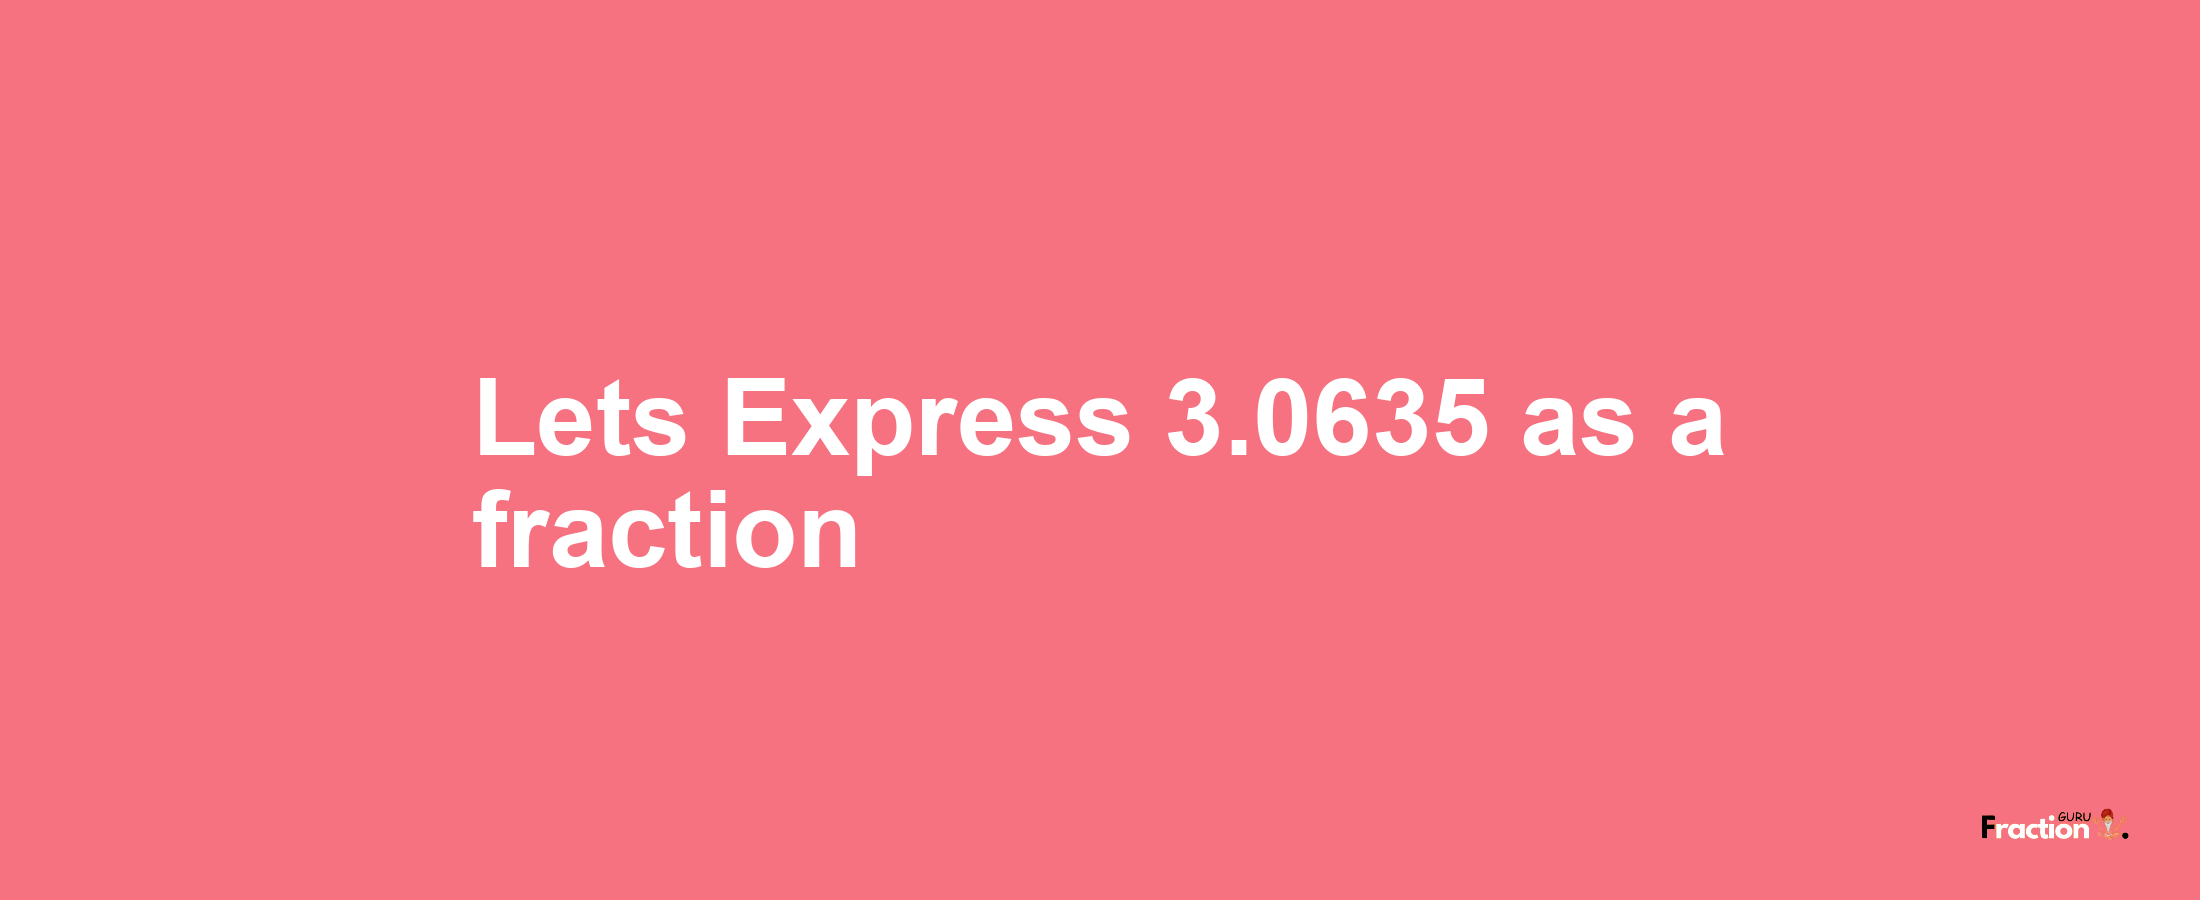 Lets Express 3.0635 as afraction